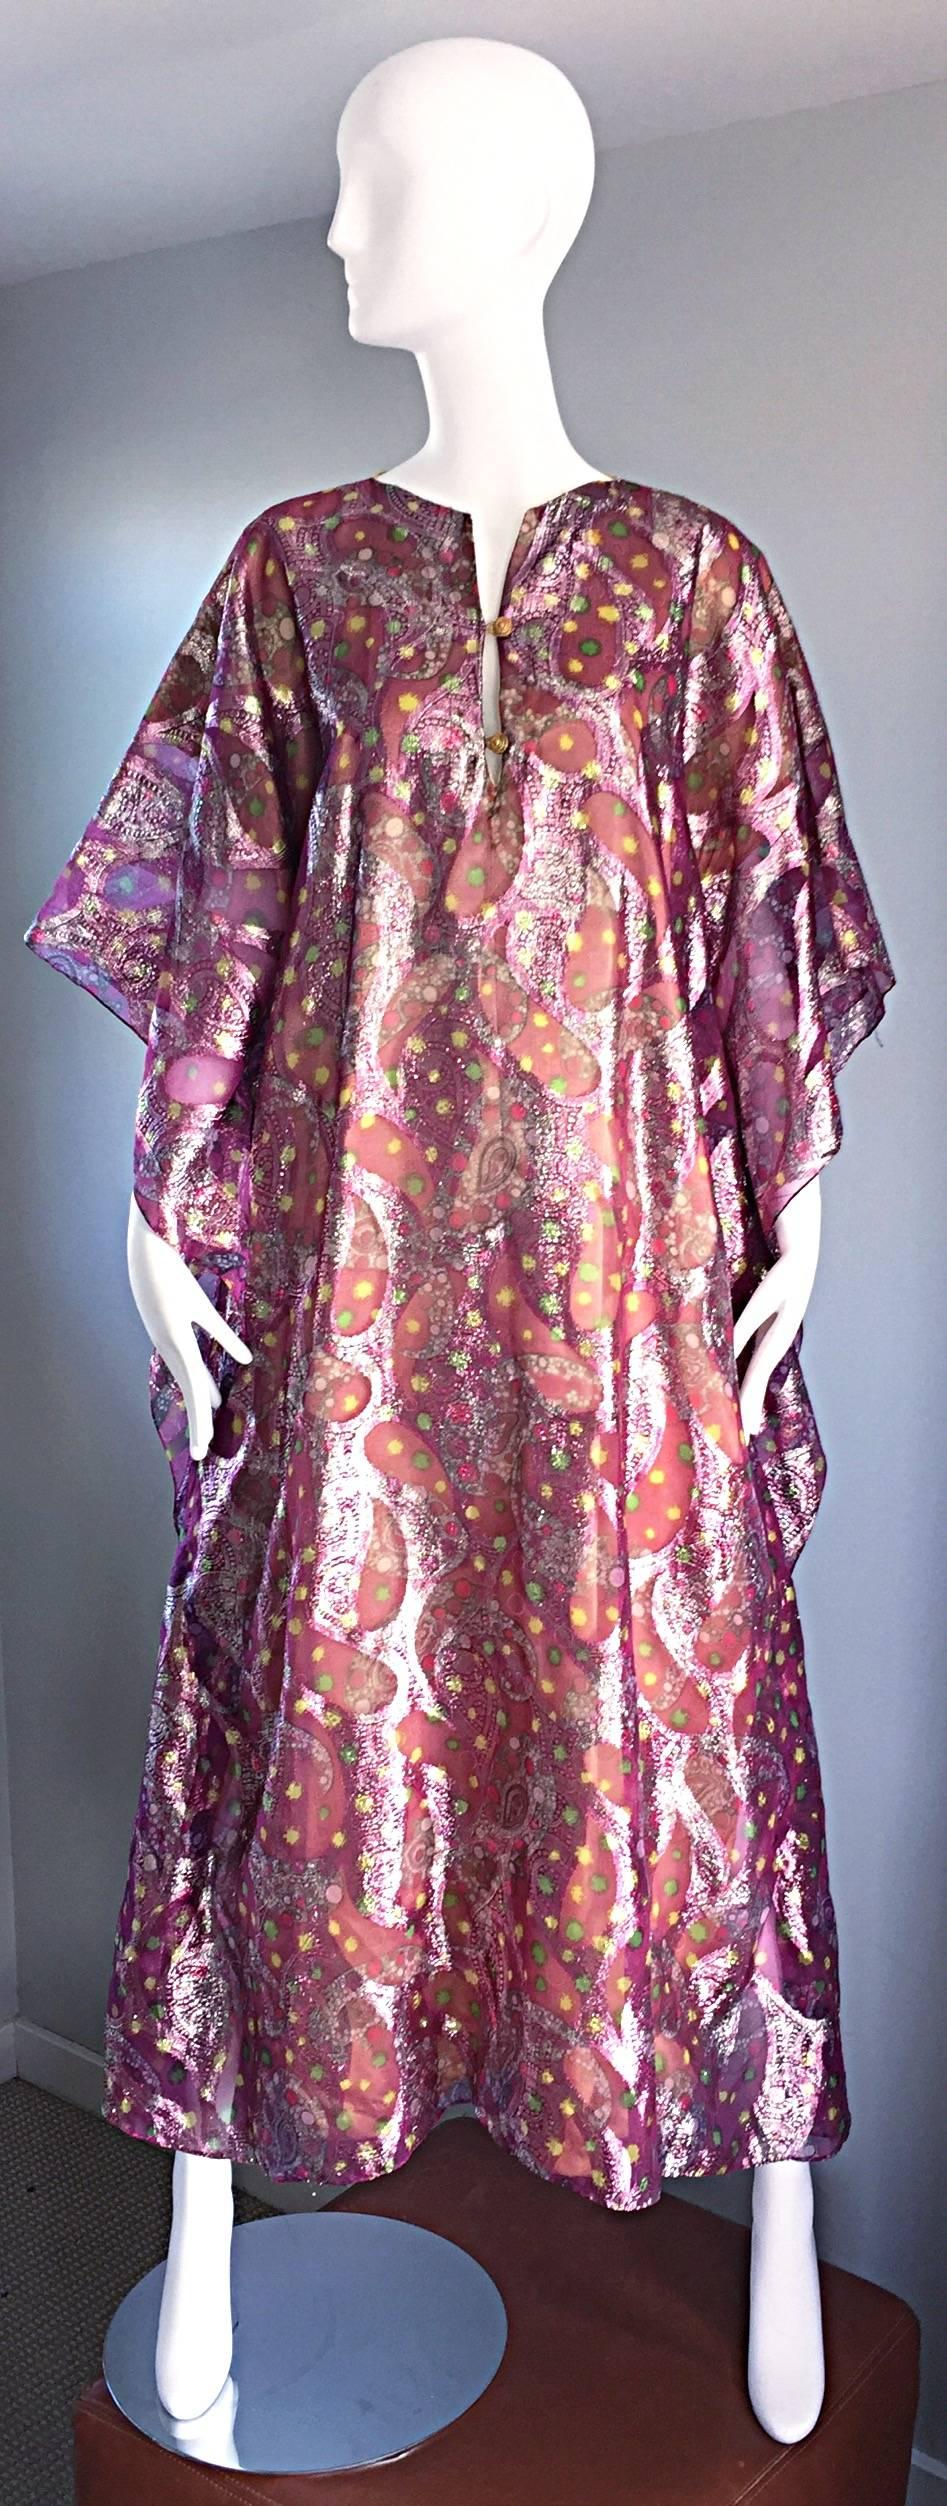 Amazing vintage 1960s caftan / kaftan by Hollywood designer GEORGIE KEYLOUN!!! Amazing metallic chiffon paisley in beautiful hues of purple, pink, gold, silver, green and yellow! So much detail went into the construction of this beauty! Functional